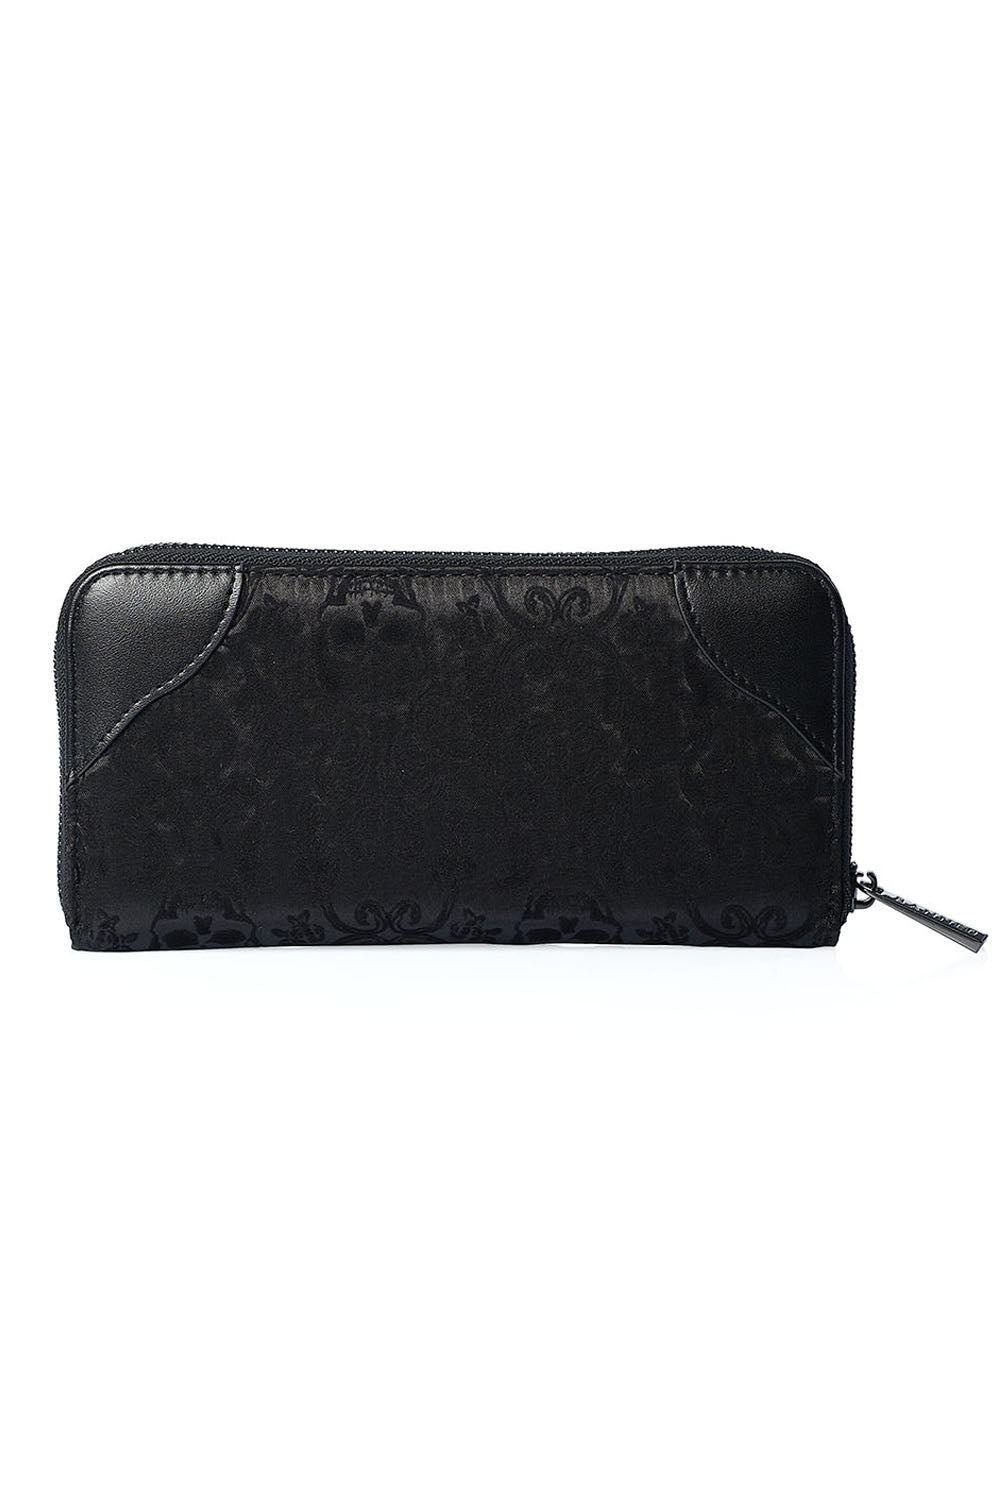 Banned Alternative Vine Black Cameo Lady Lace Wallet